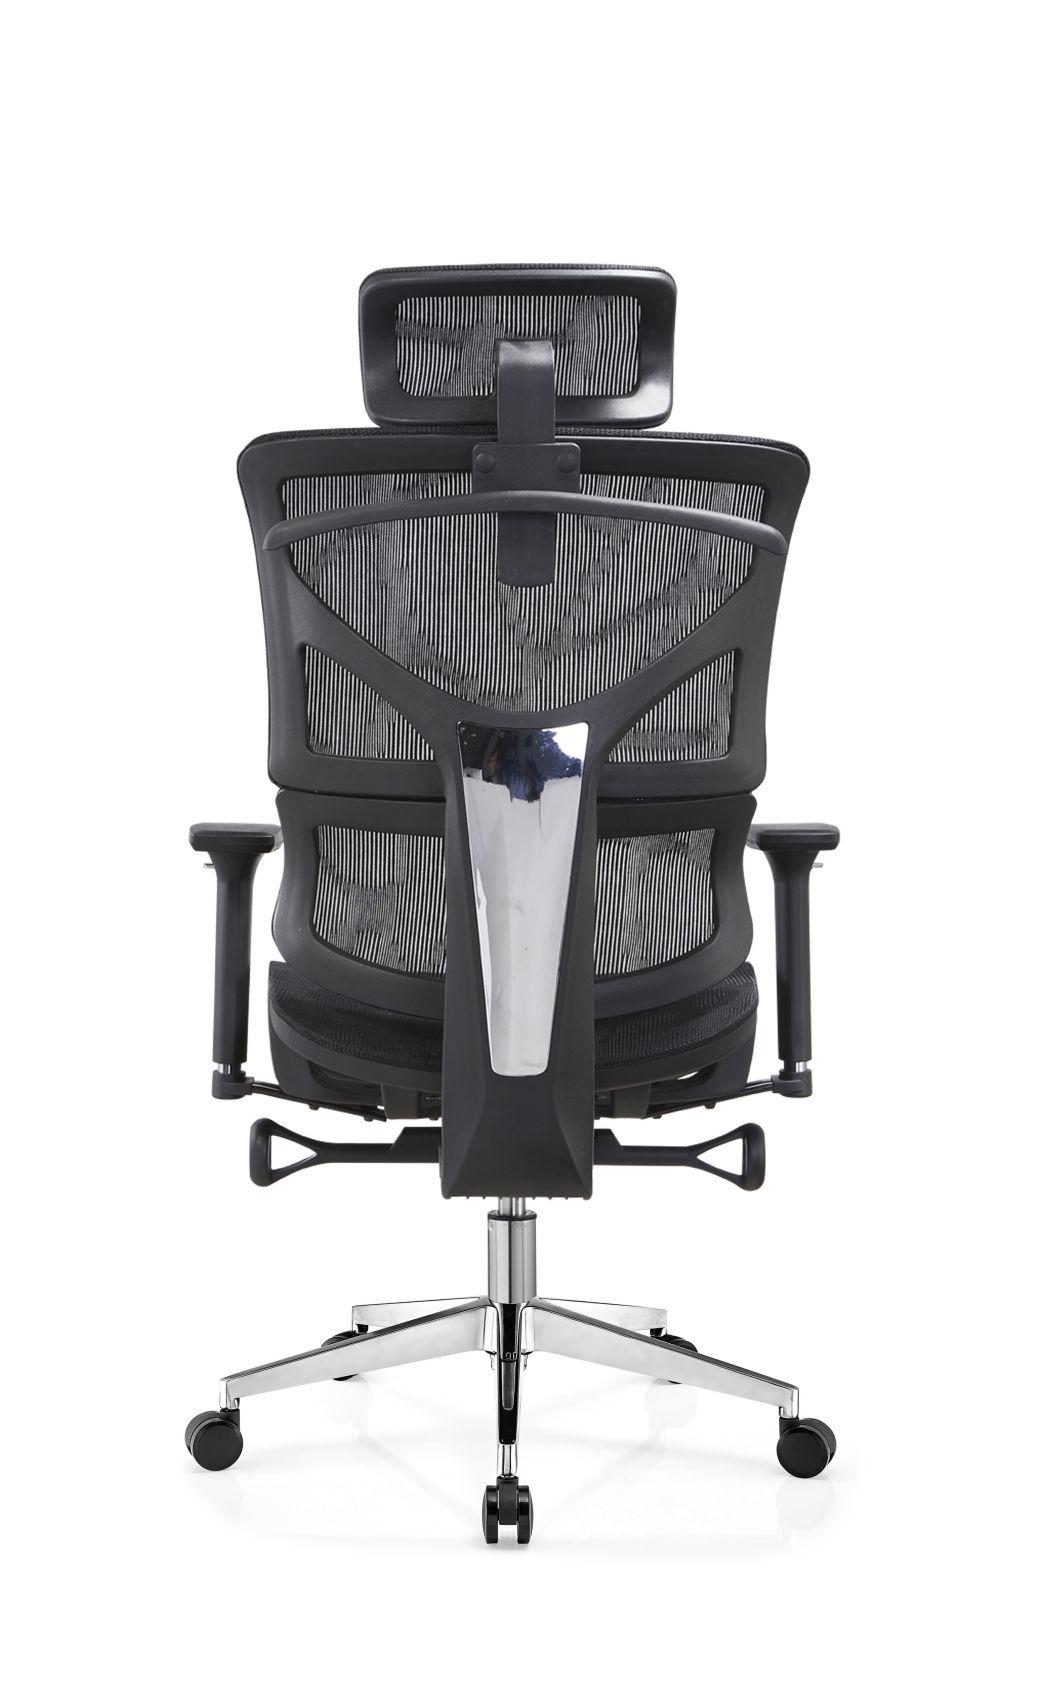 Black New Material High Resilience Flexibility Soundproof Mesh Office Seat Chairs